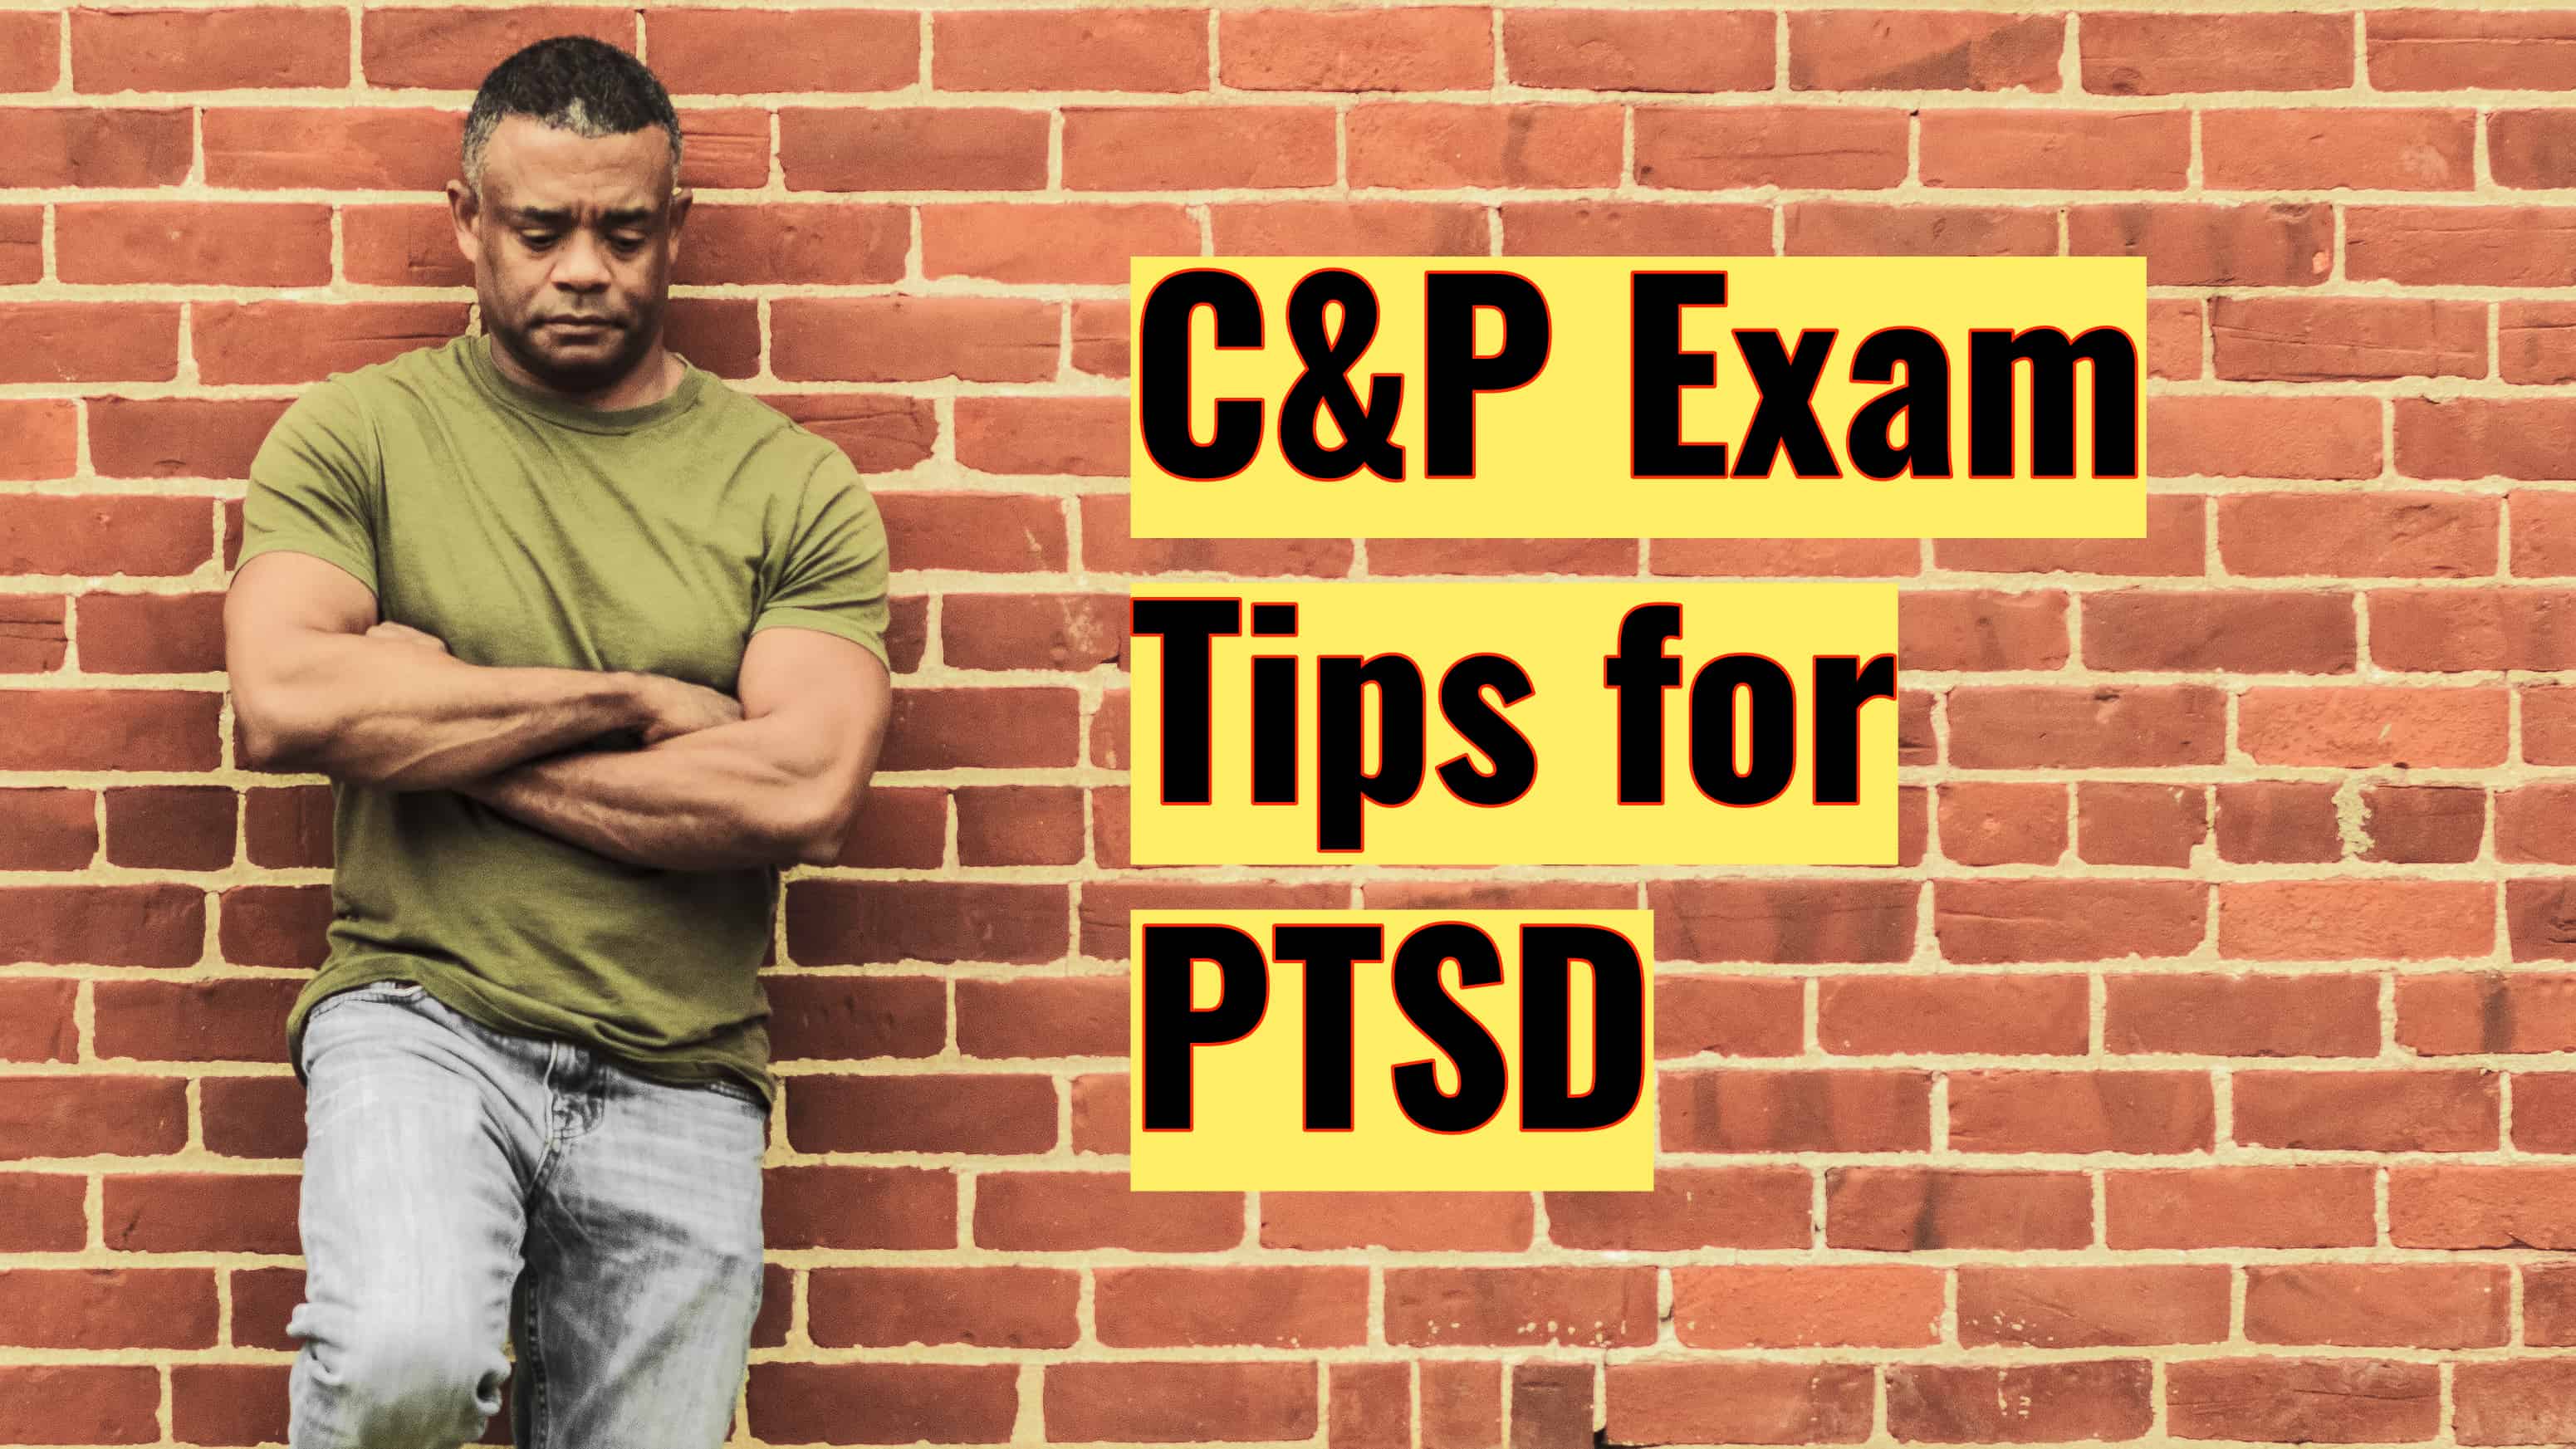 5 Tips to Prepare for Your C&P Exam for PTSD CP Exam Tips for PTSD